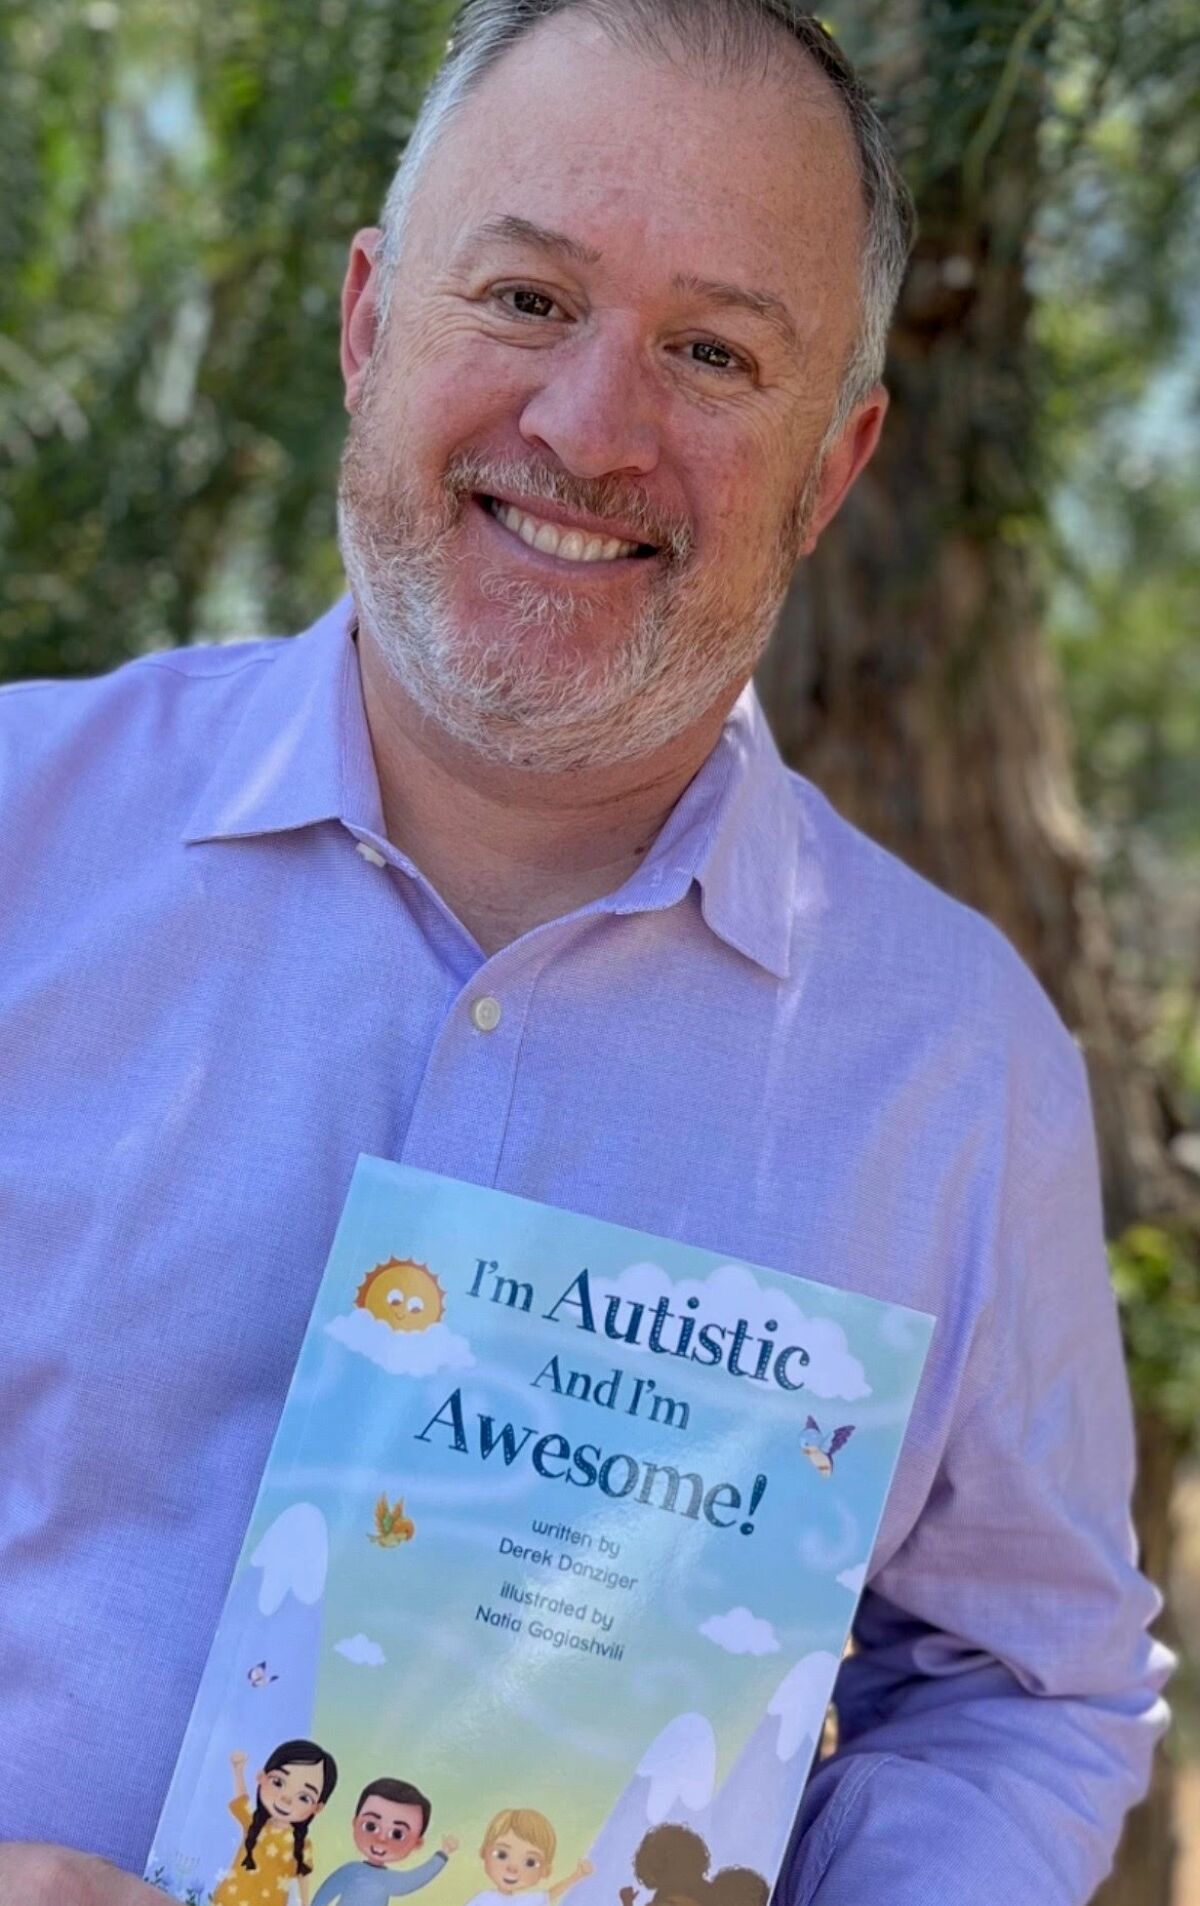 This book, "I'm Autistic And I'm Awesome,!" by San Diego author Derek Danziger, is available on Amazon.com.